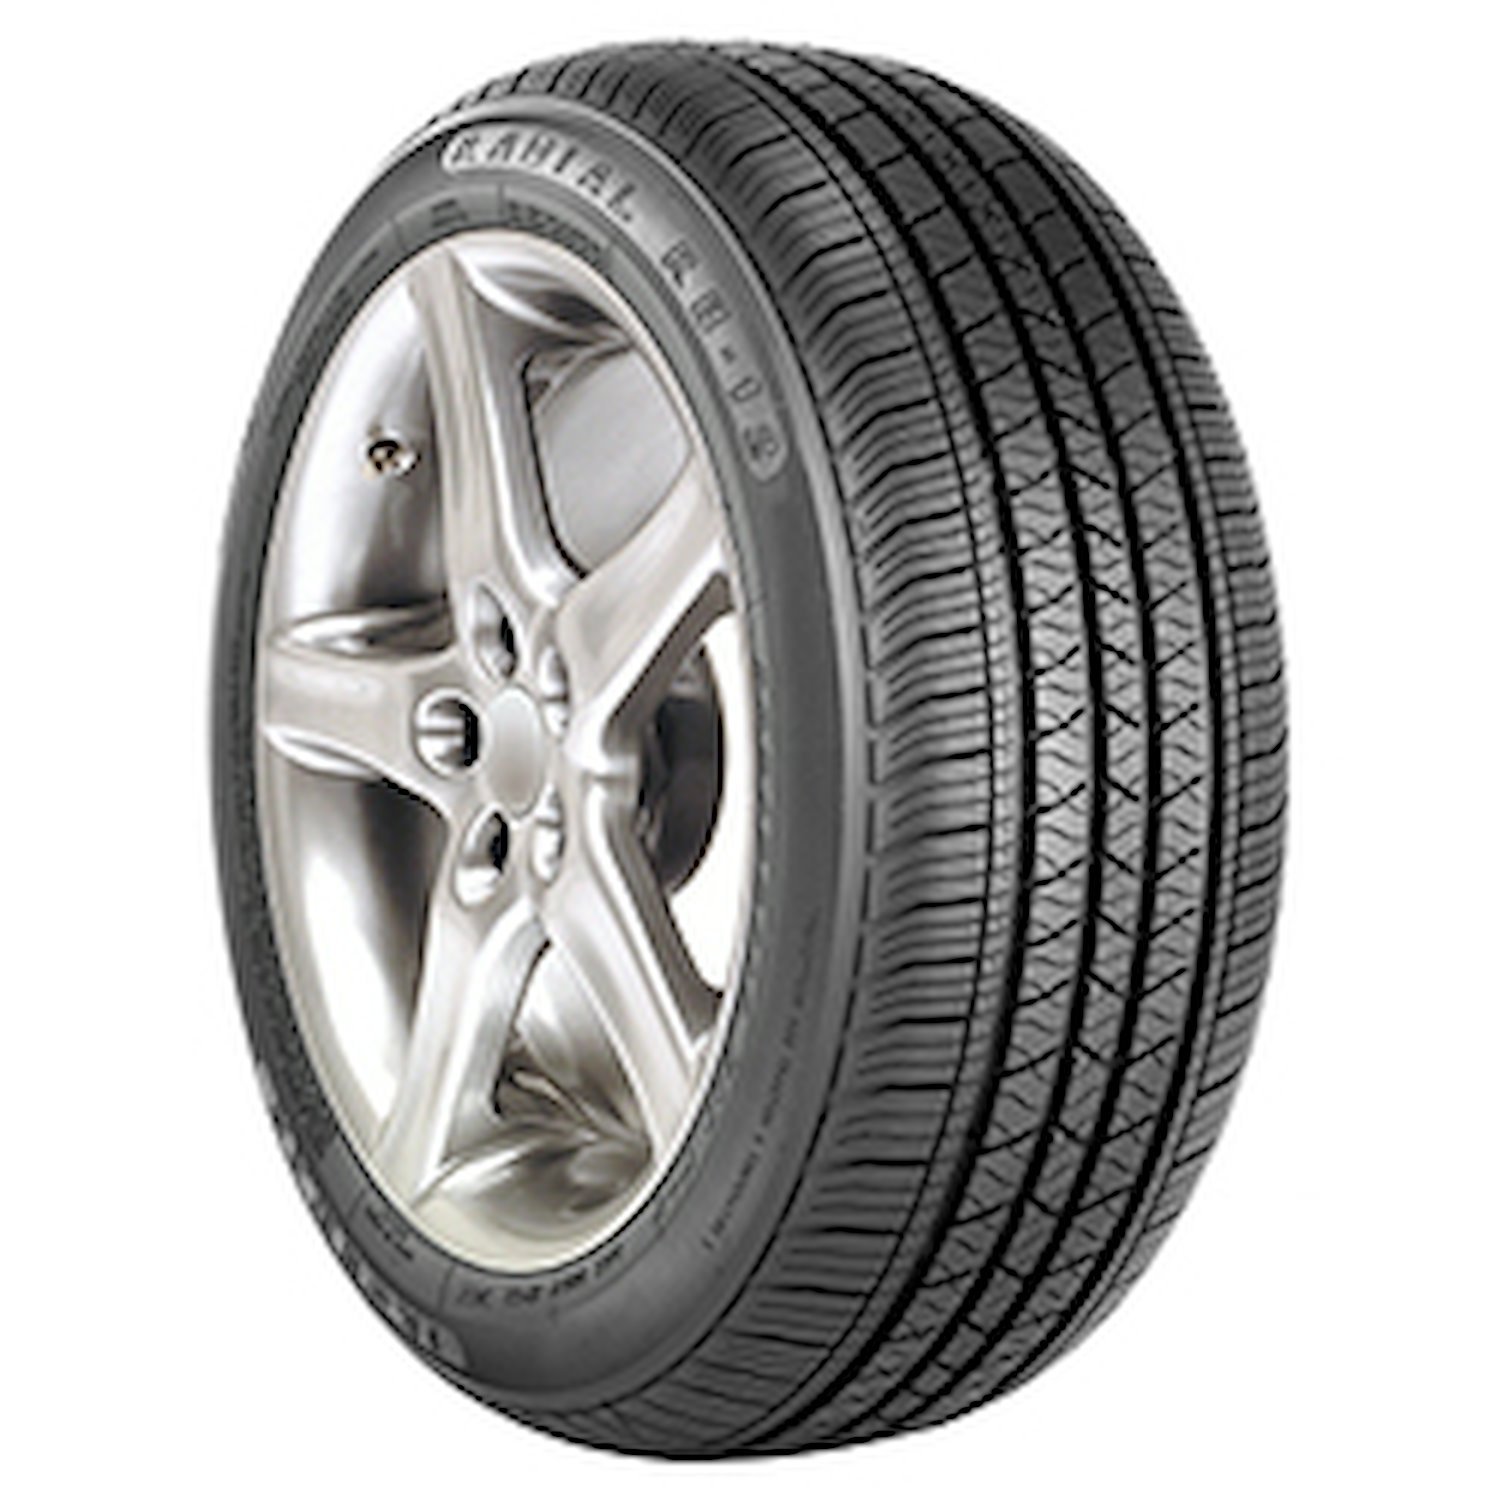 RB-12 Tire, 225/70R15 100T